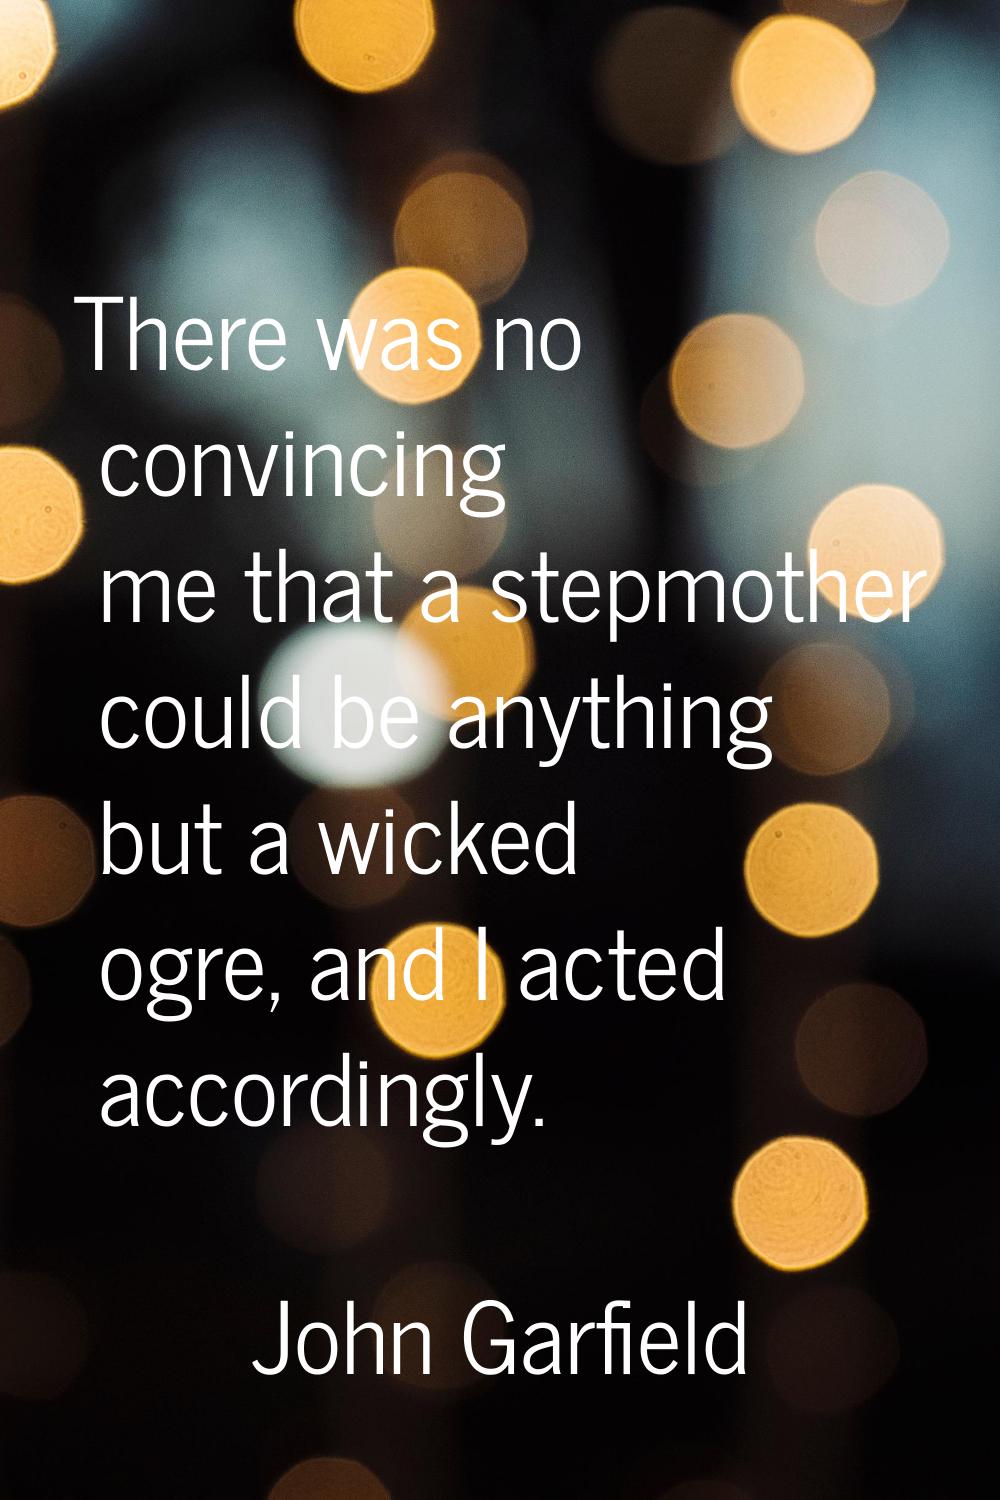 There was no convincing me that a stepmother could be anything but a wicked ogre, and I acted accor